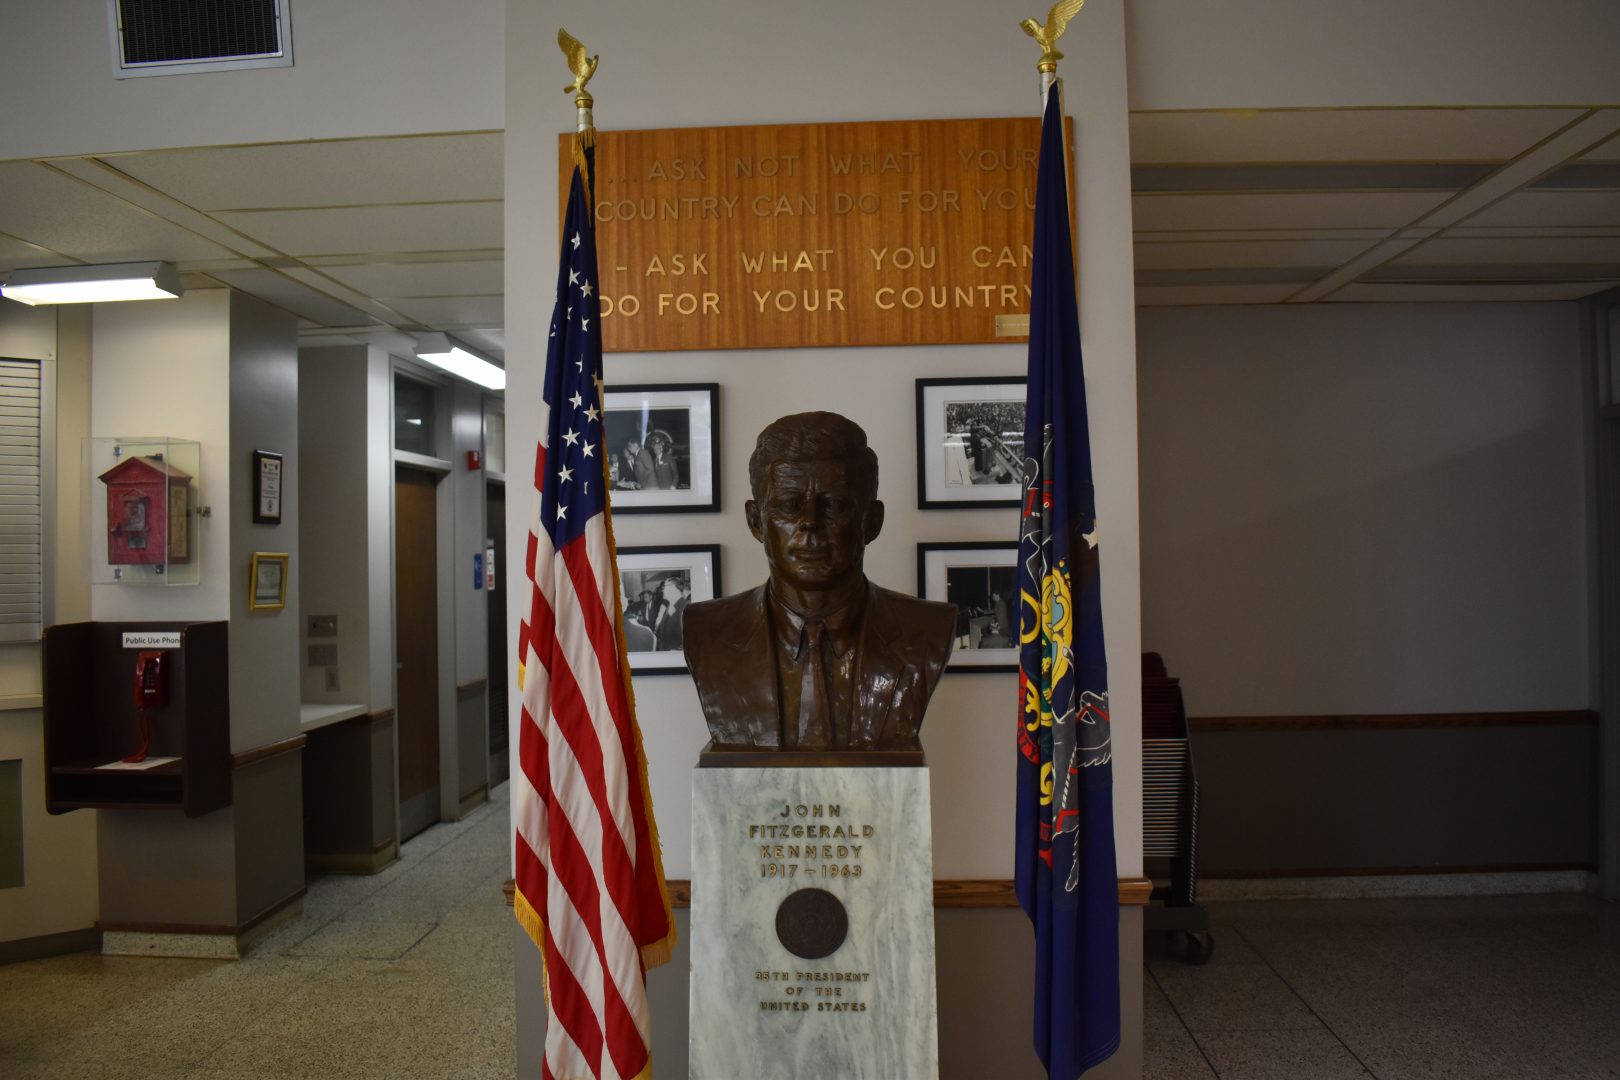 A tribute to President John F. Kennedy greets visitors at the entrance to Erie’s city hall on Sept. 12, 2019.